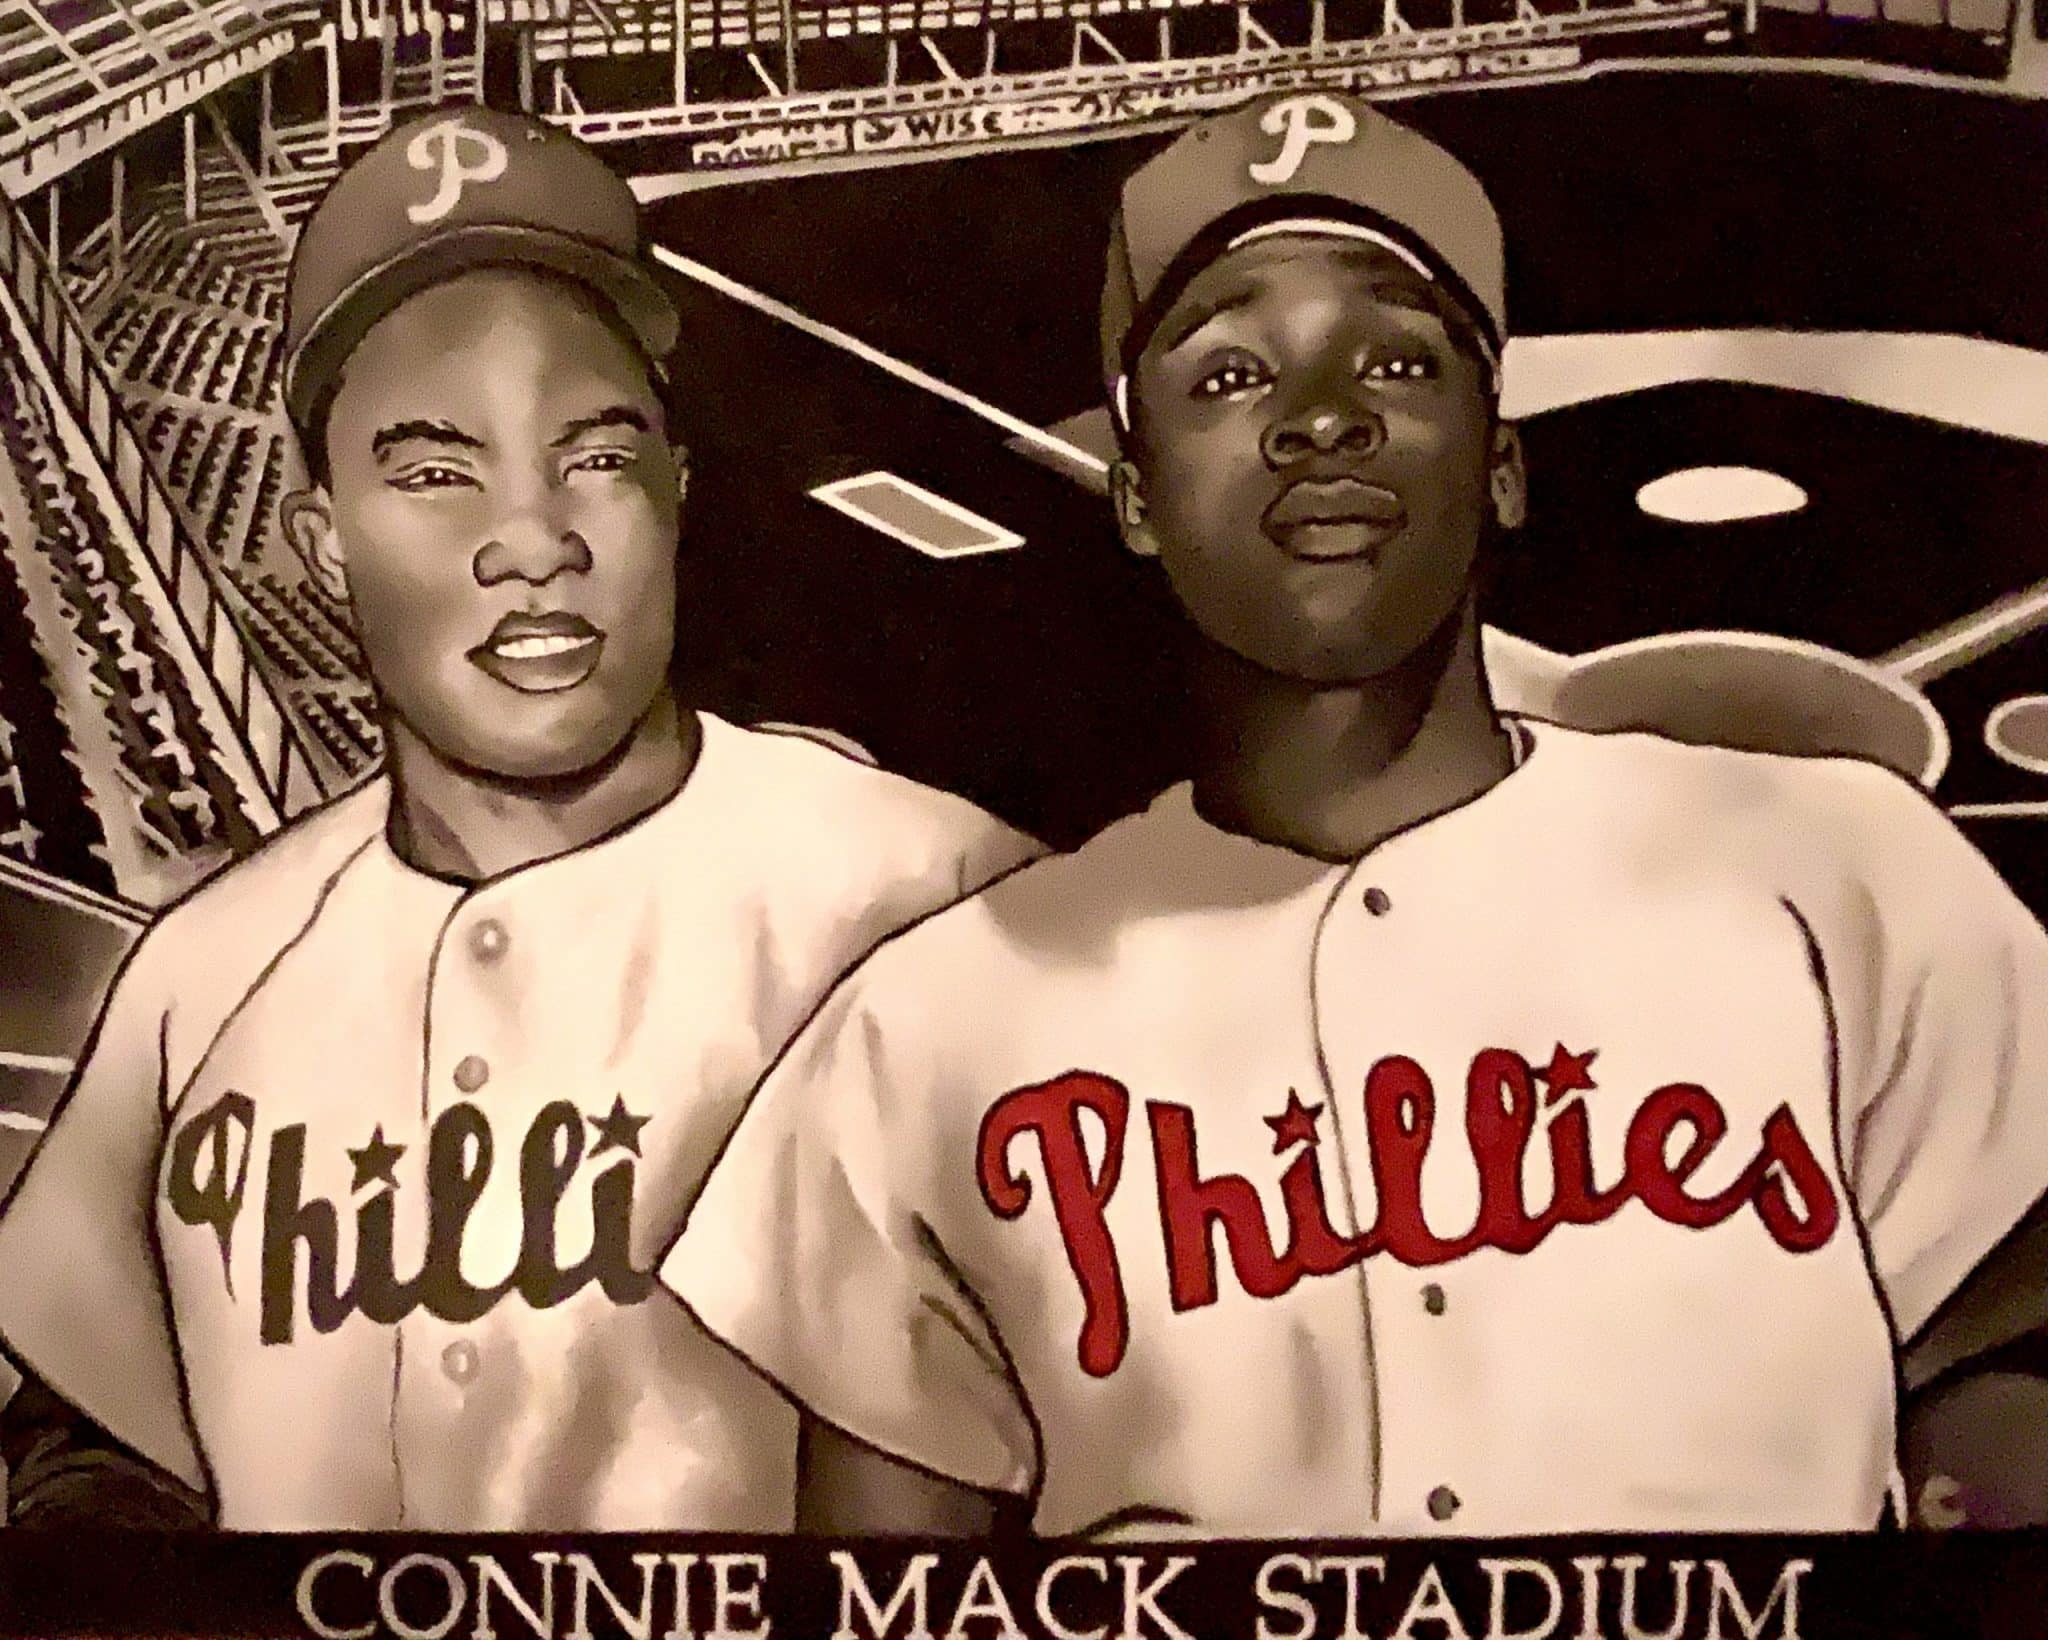 An artist's drawing of two black baseball players with Phillies jerseys 